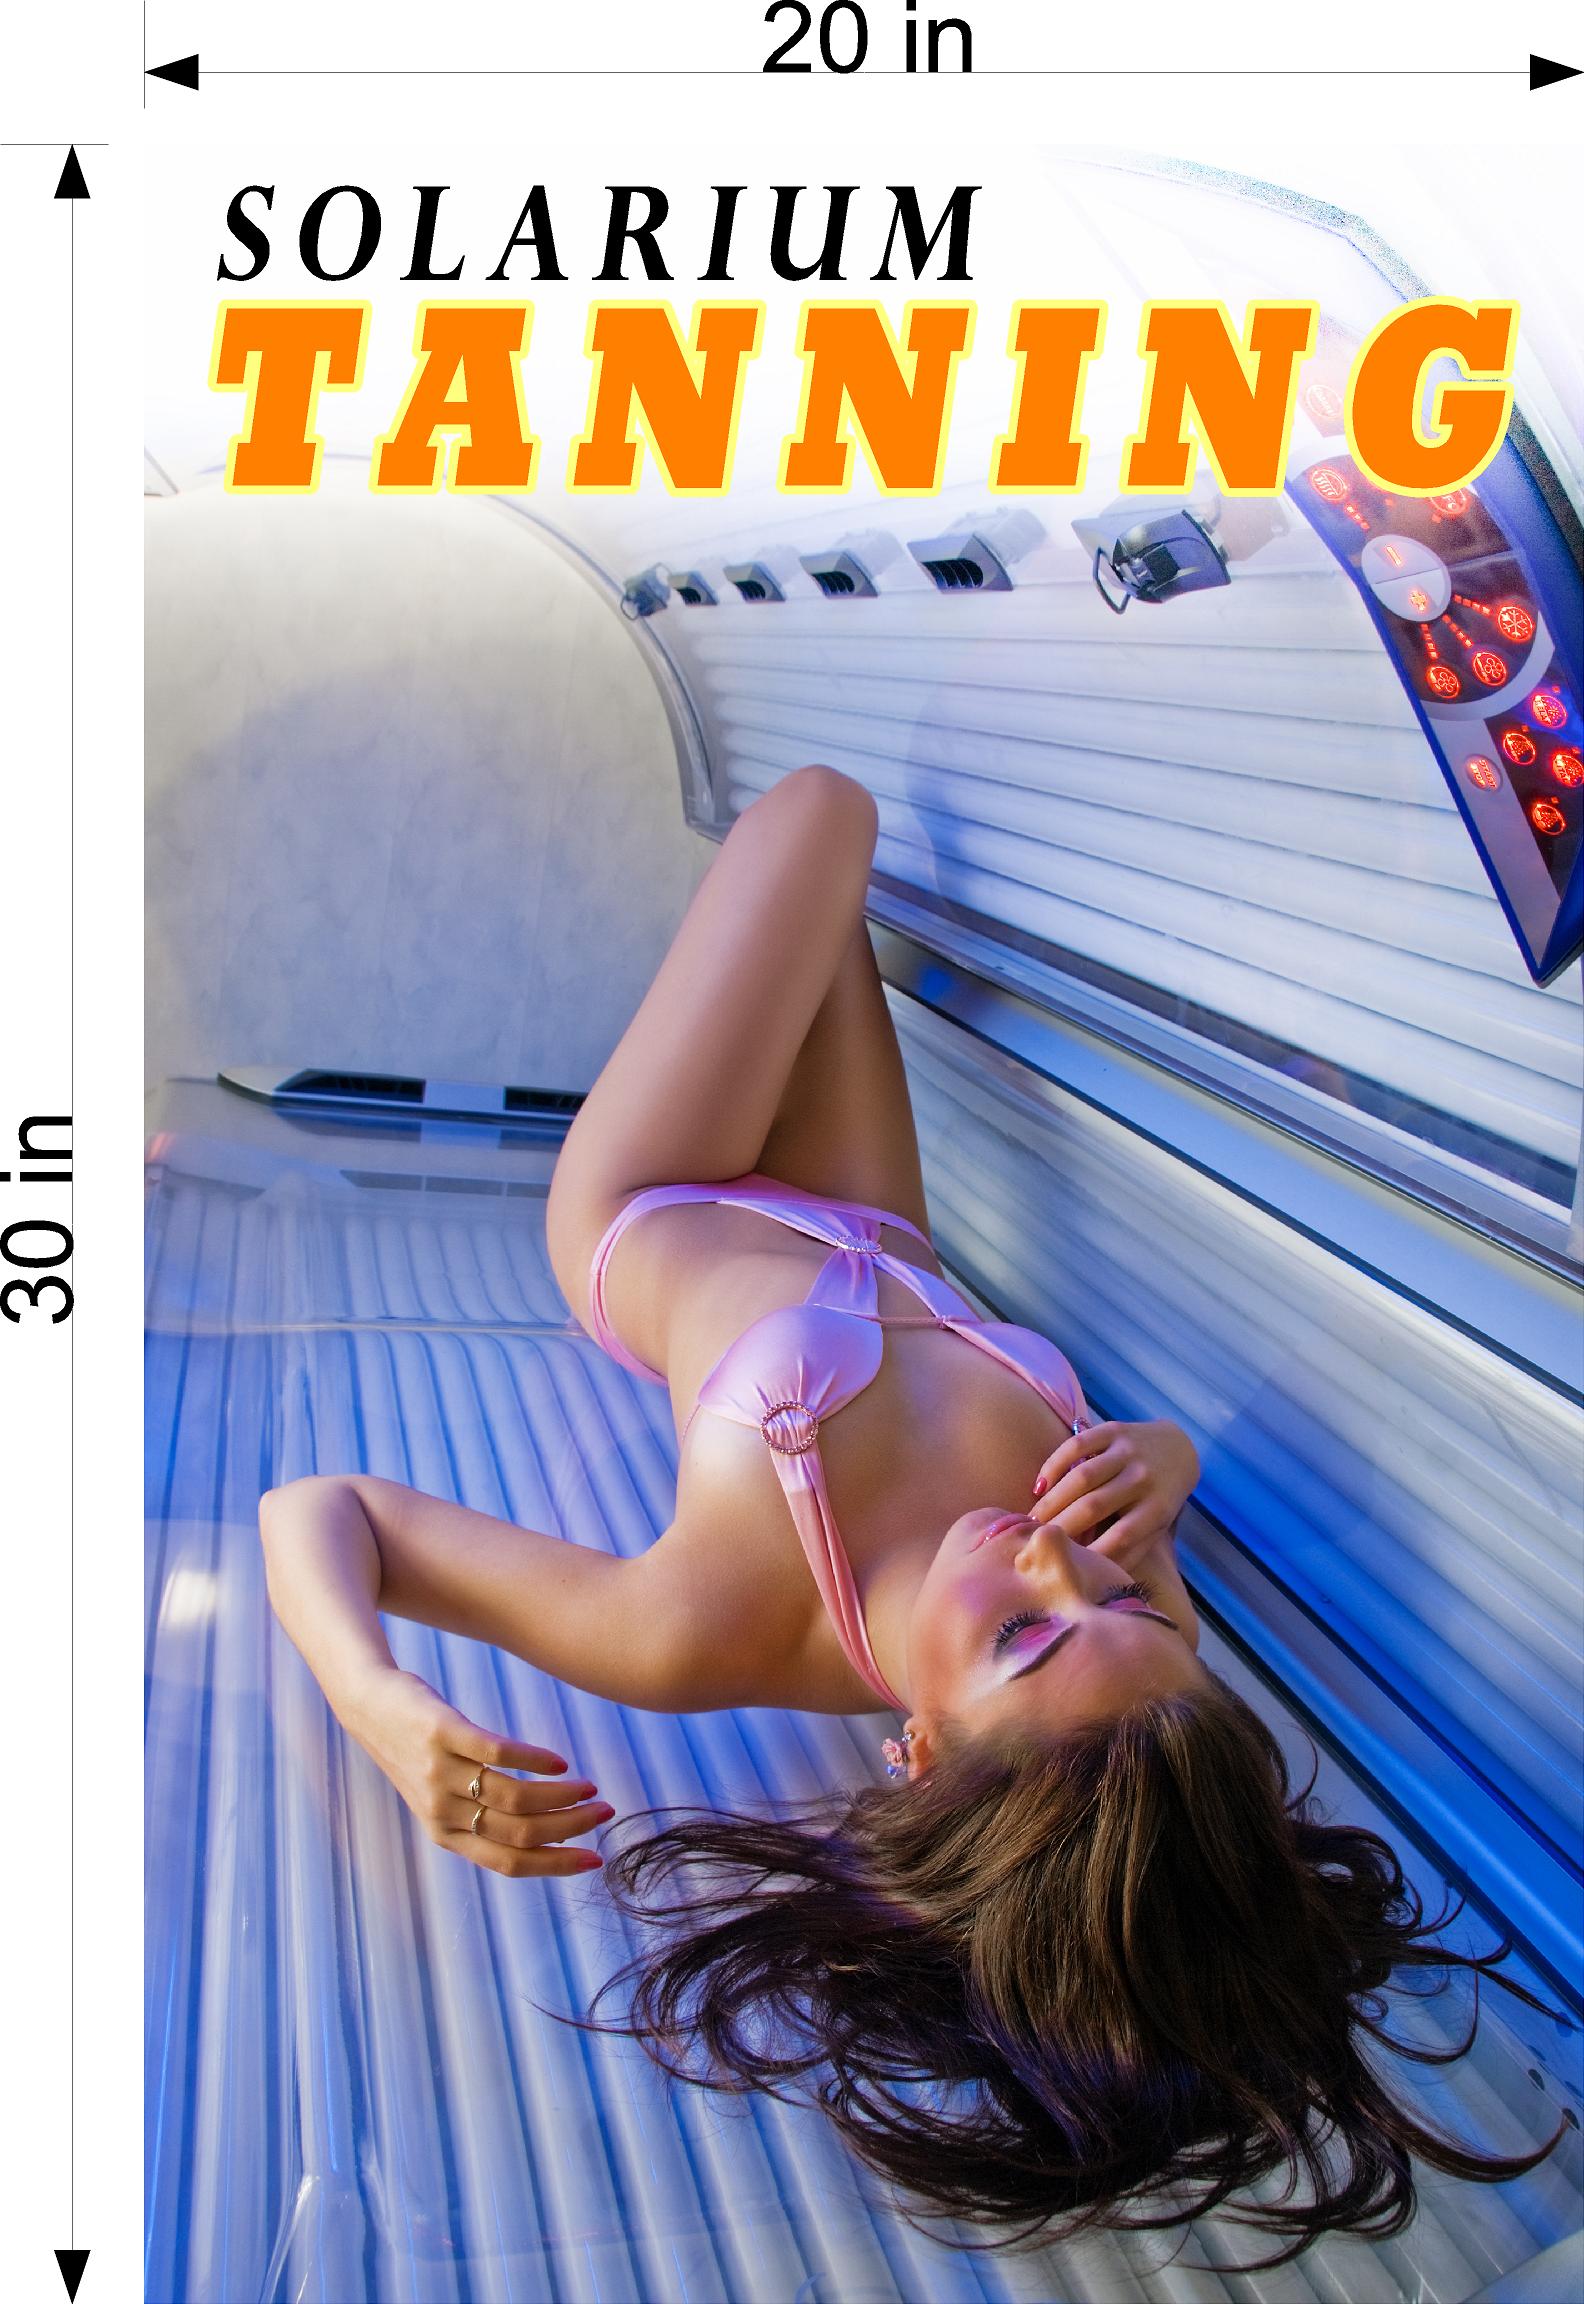 Tanning 03 Wallpaper Poster Decal with Adhesive Backing Wall Sticker Decor Interior Sign Spray Service Solarium Vertical